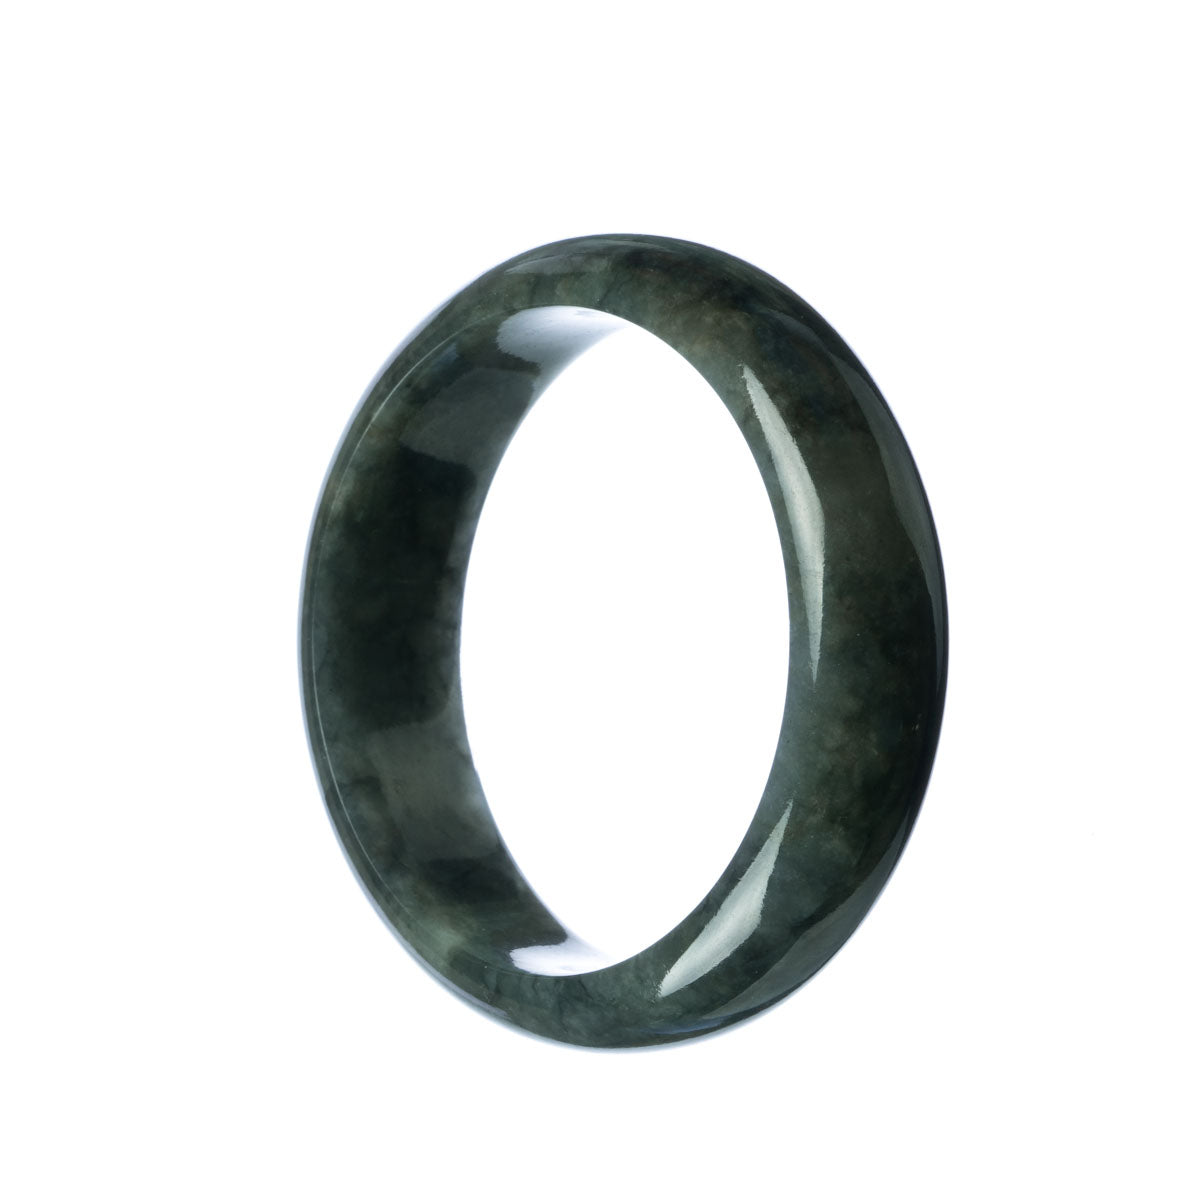 A close-up photo of a dark grey jadeite jade bracelet with a half moon shape, measuring 58mm in diameter. The bracelet is of high quality and authenticity, made by MAYS™.